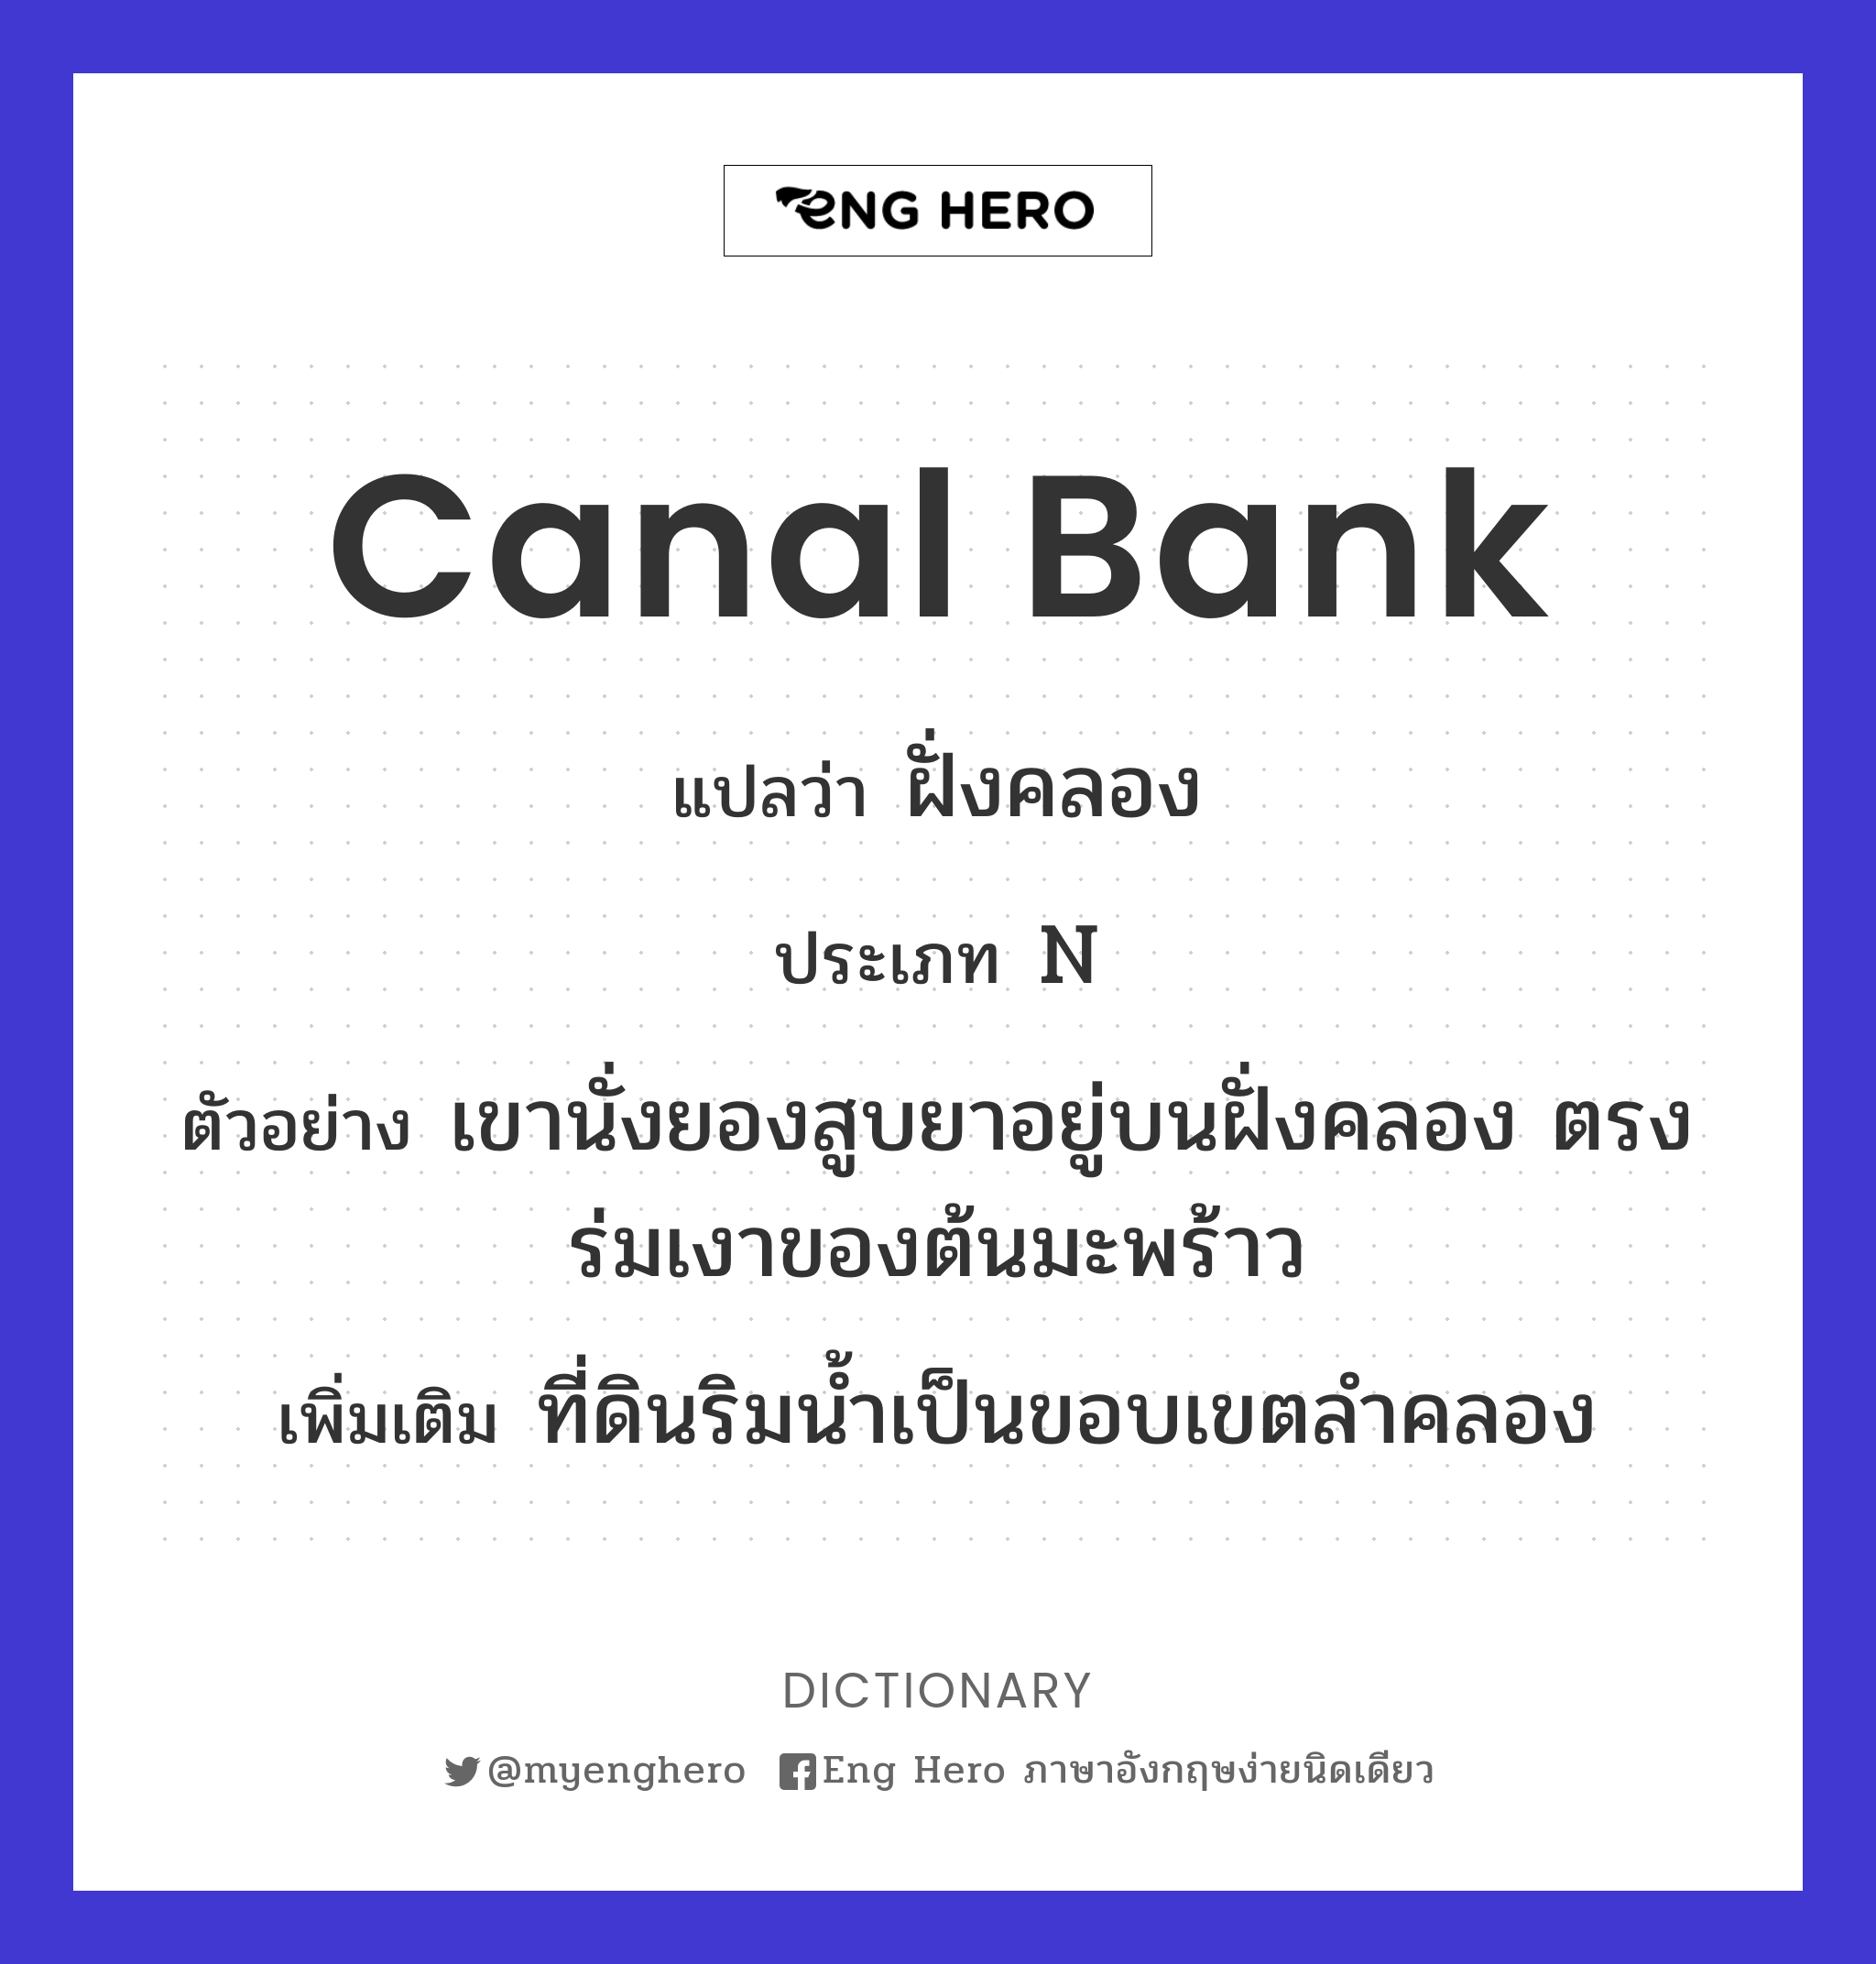 canal bank